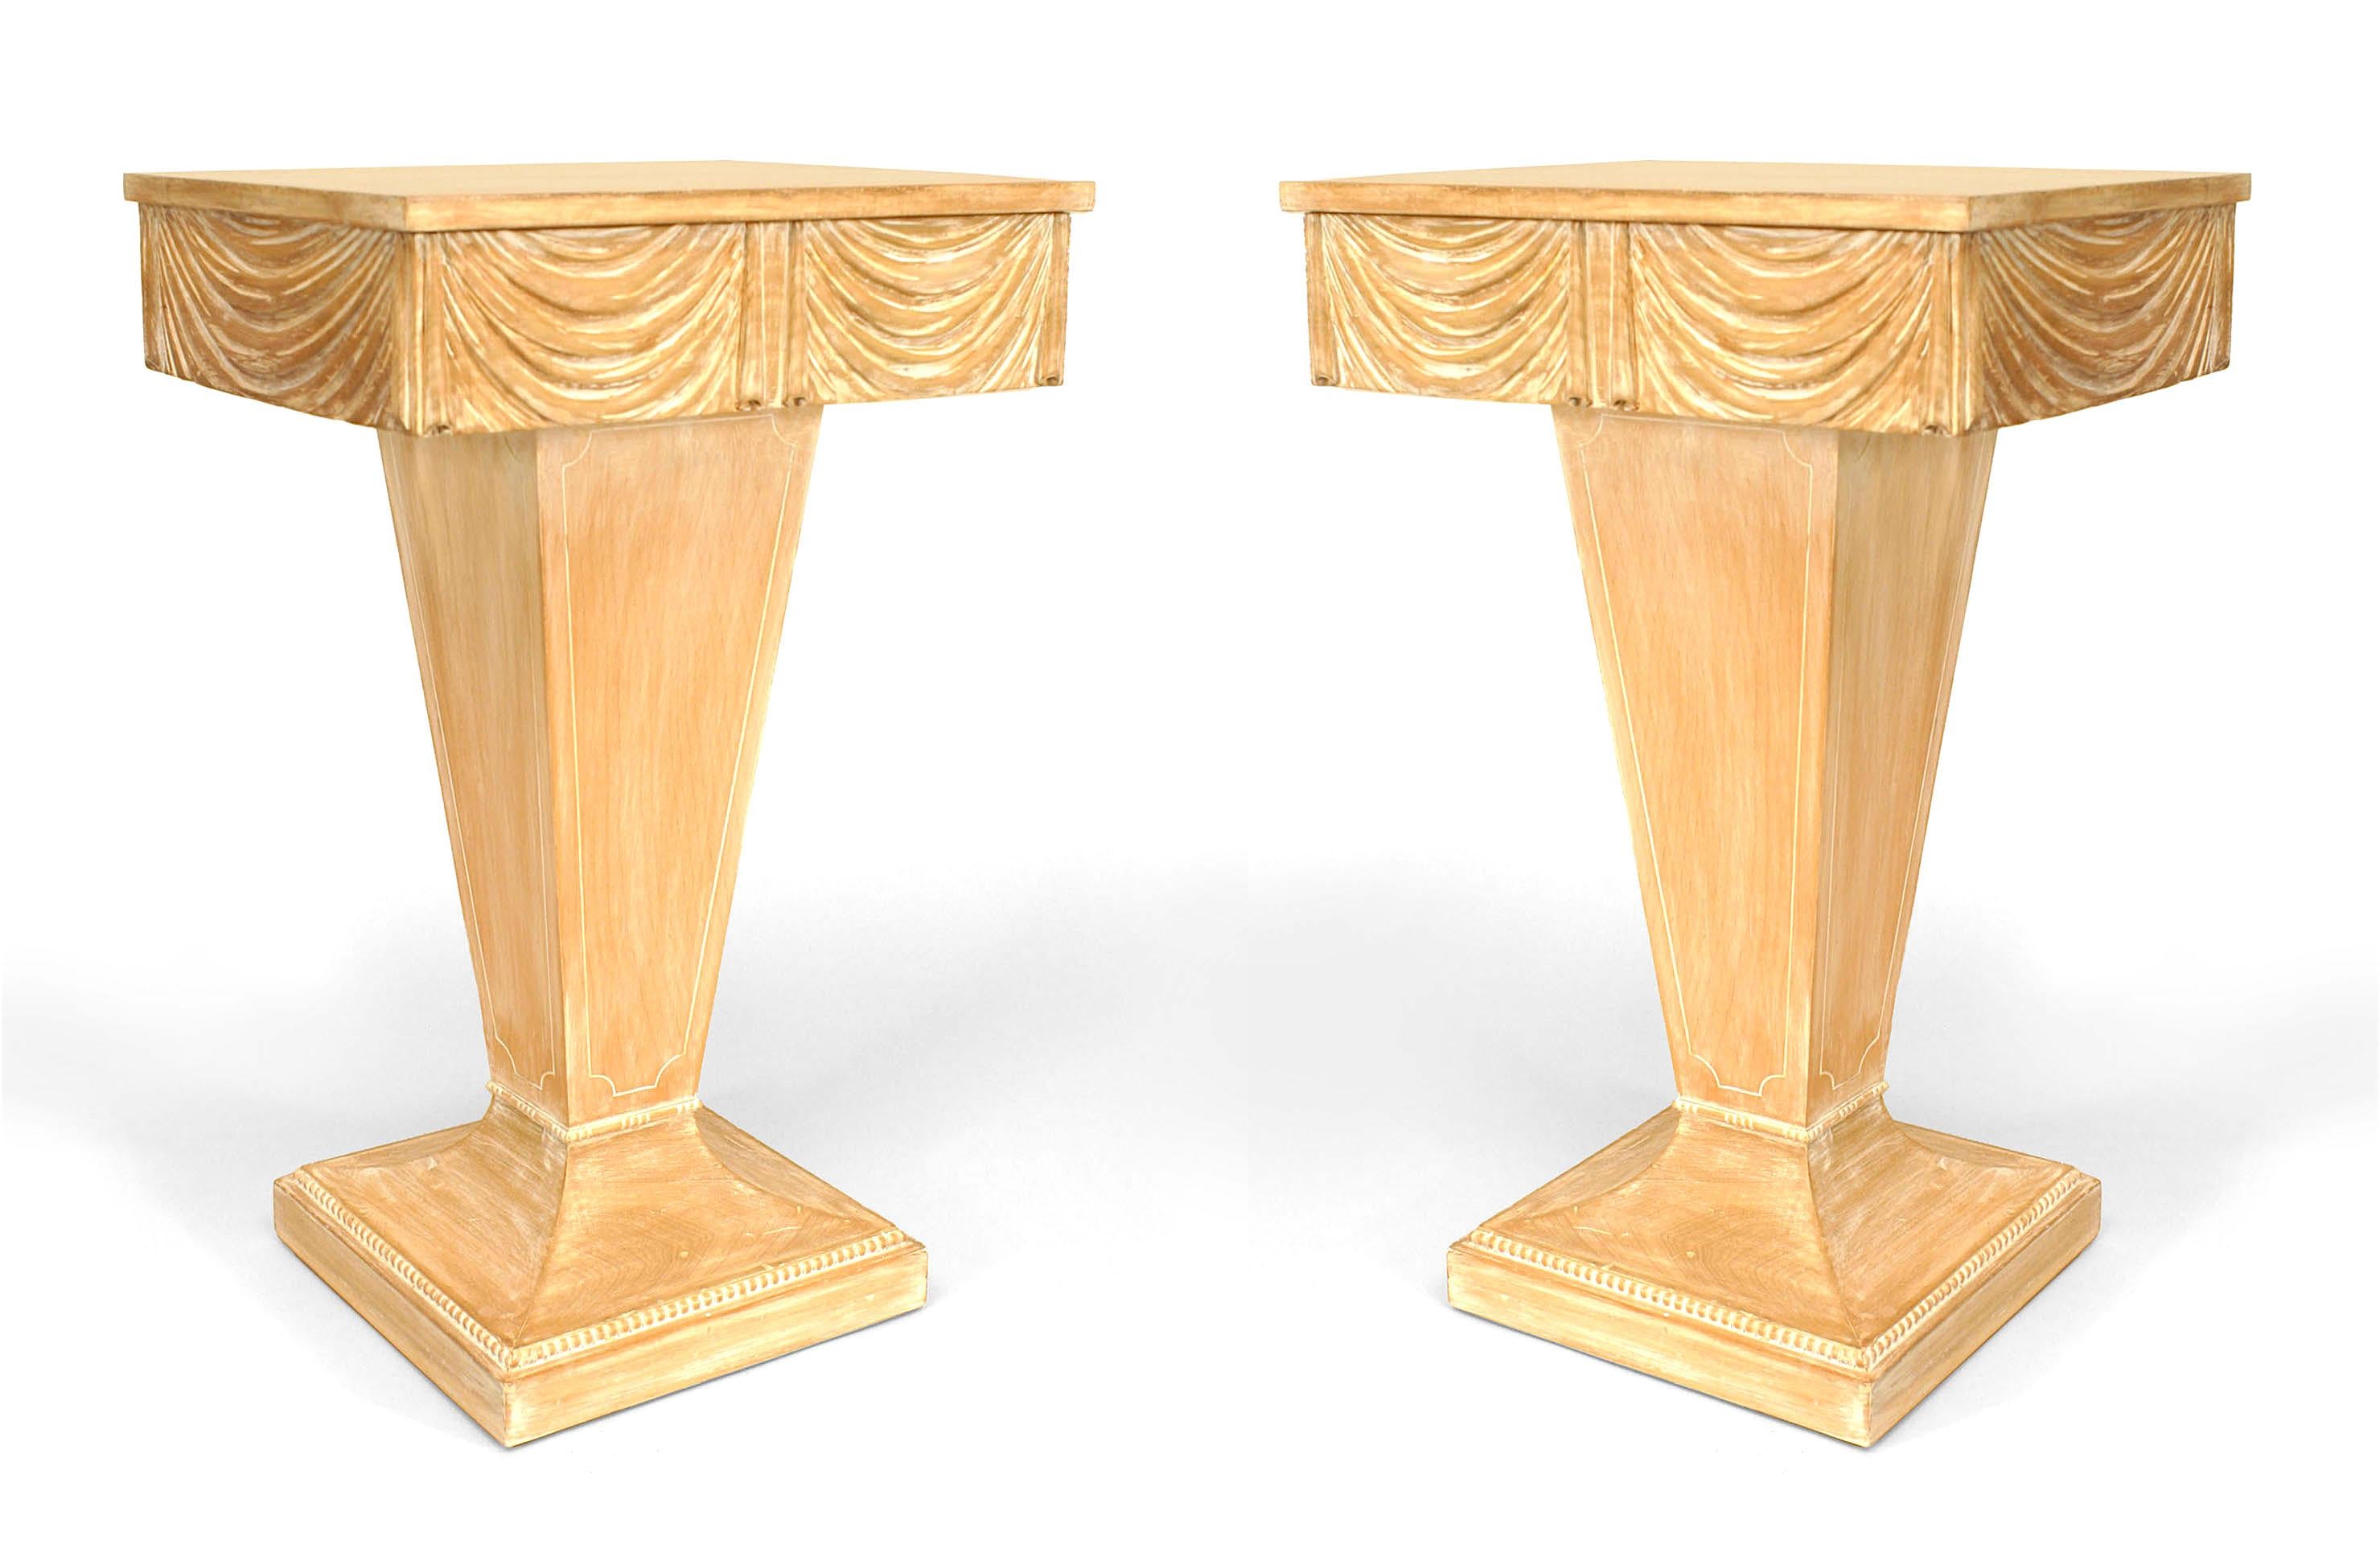 Pair of Art Moderne stripped end tables with a carved swag apron and drawer supported on a tapered pedestal base. (GROSFELD HOUSE) (PRICED AS Pair)
